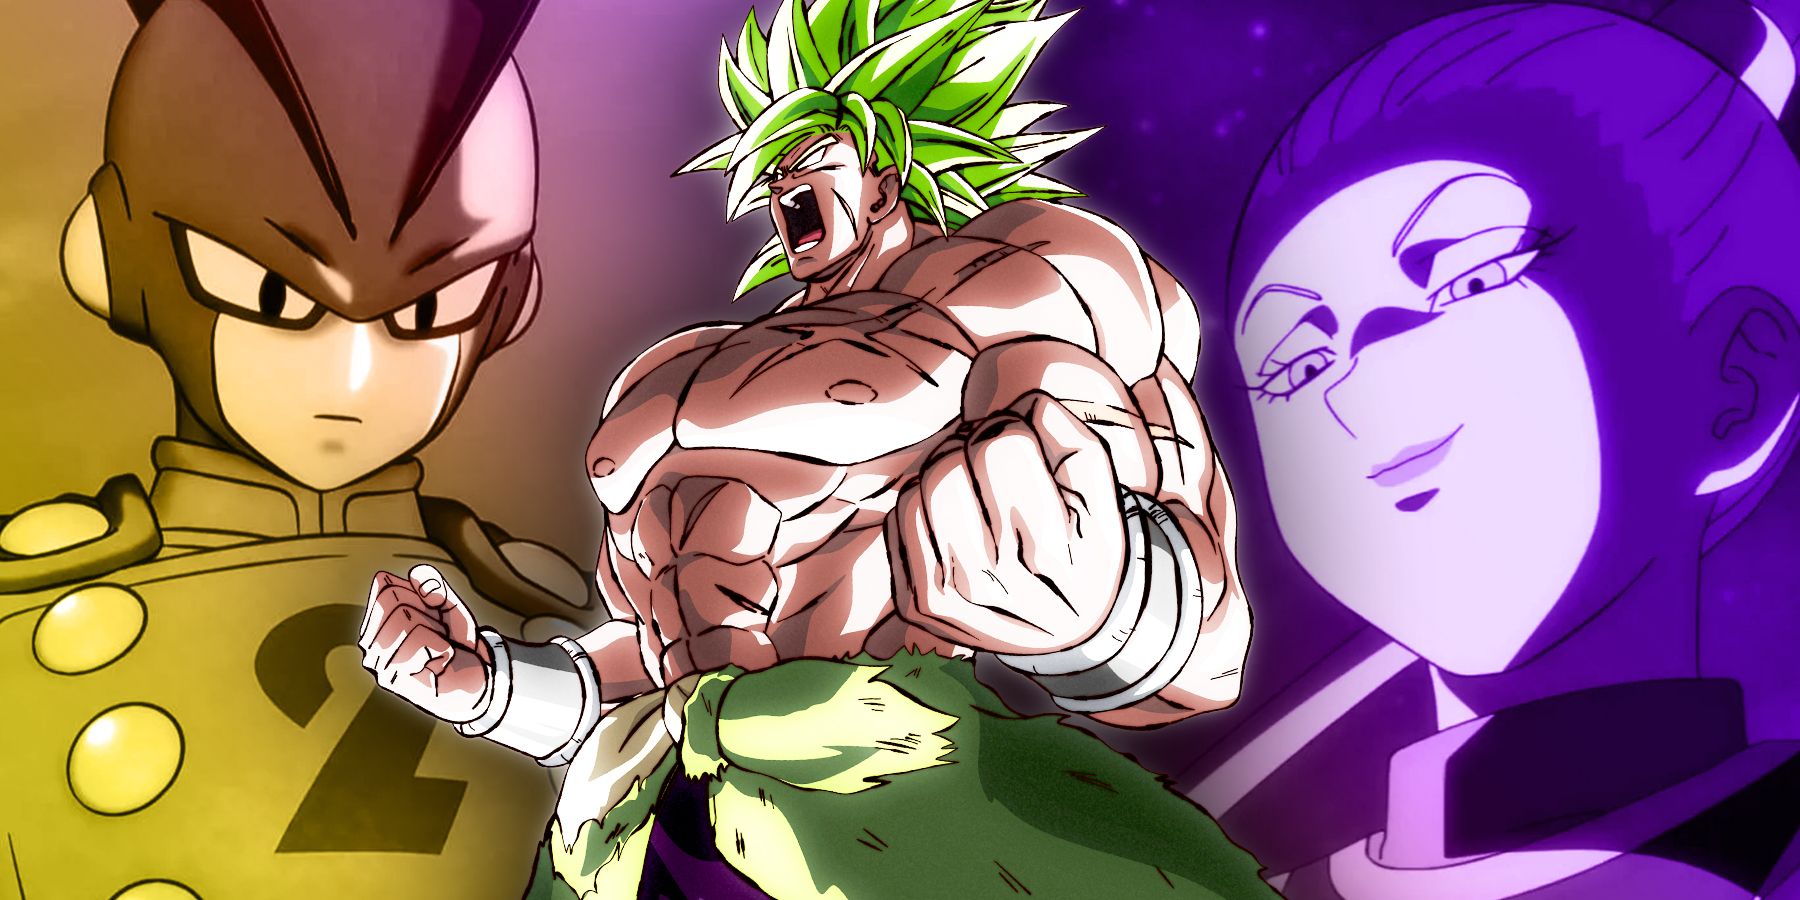 From left to right: Gamma 2, Broly, Vados.